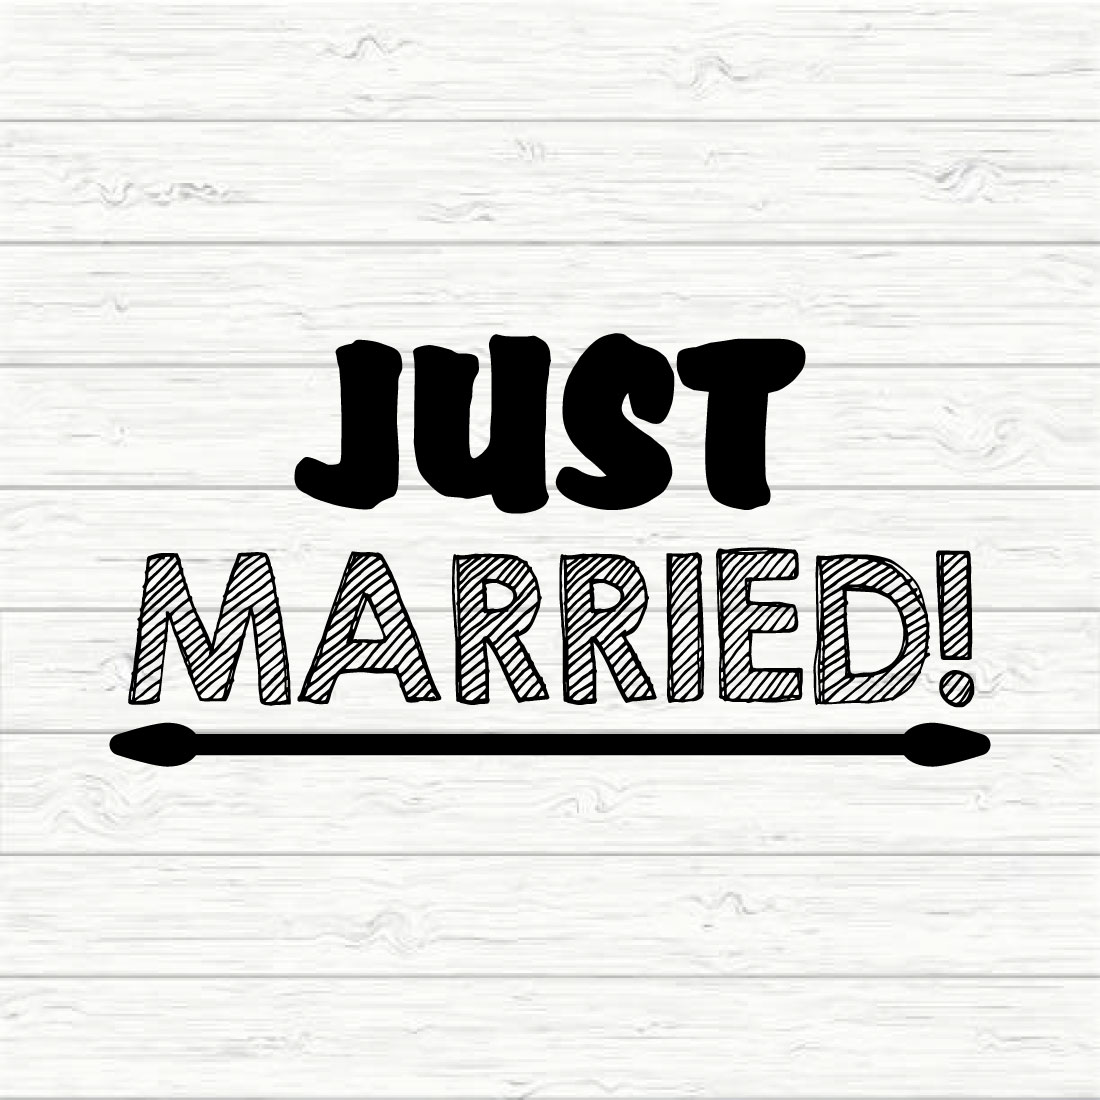 Just Married cover image.